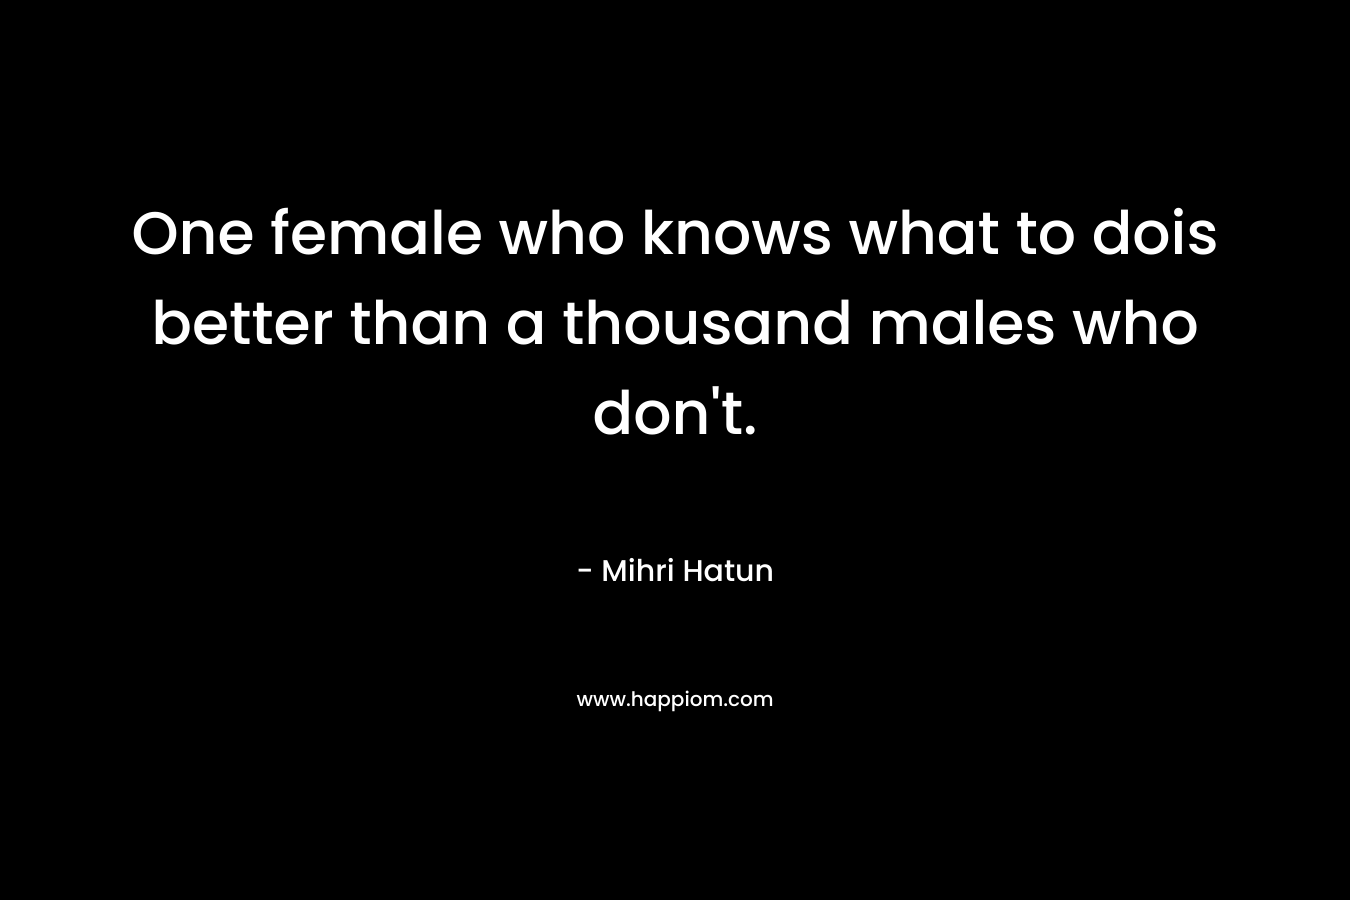 One female who knows what to dois better than a thousand males who don't.